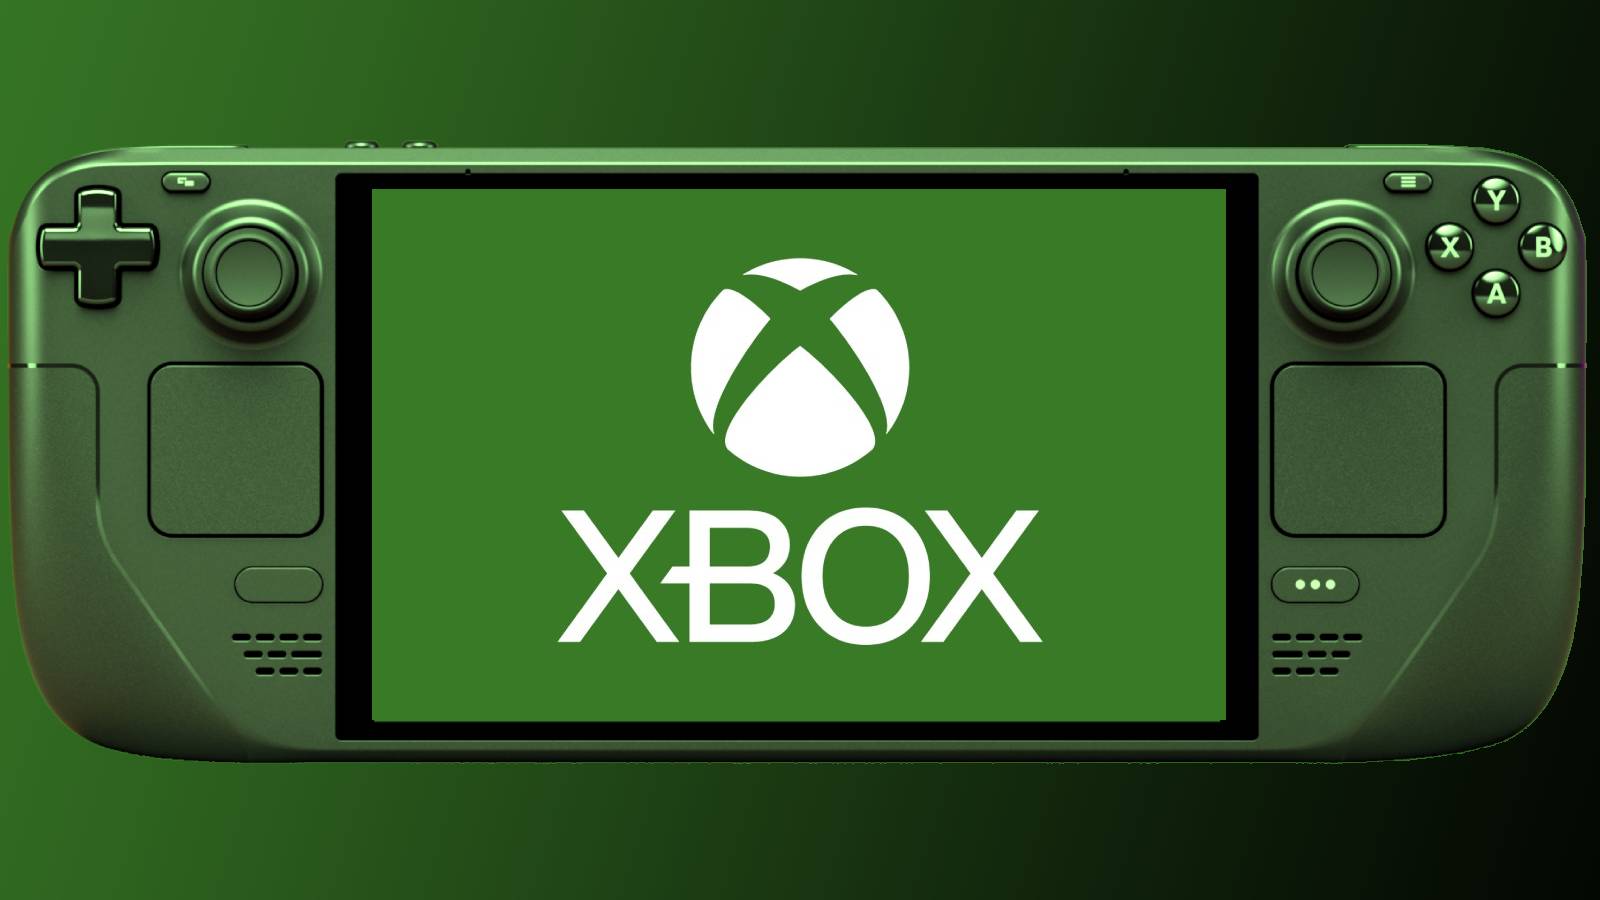 Image of the Xbox logo on the screen of a green handheld, with a green and black background.